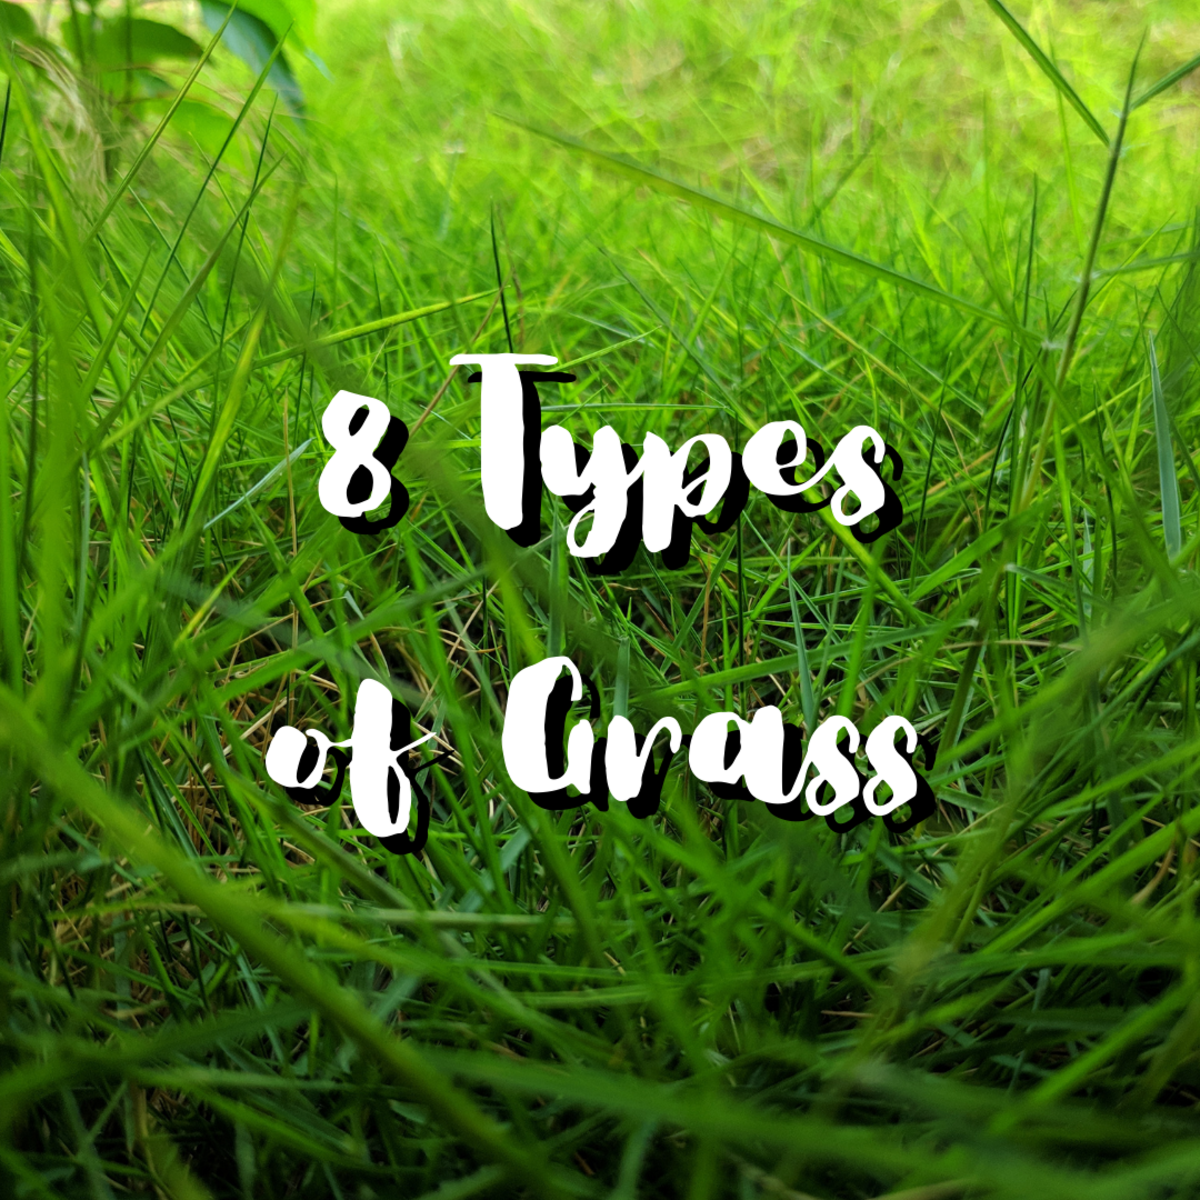 Read on to learn about eight varieties of grass, including Zebra grass, bamboo, and Blood grass.